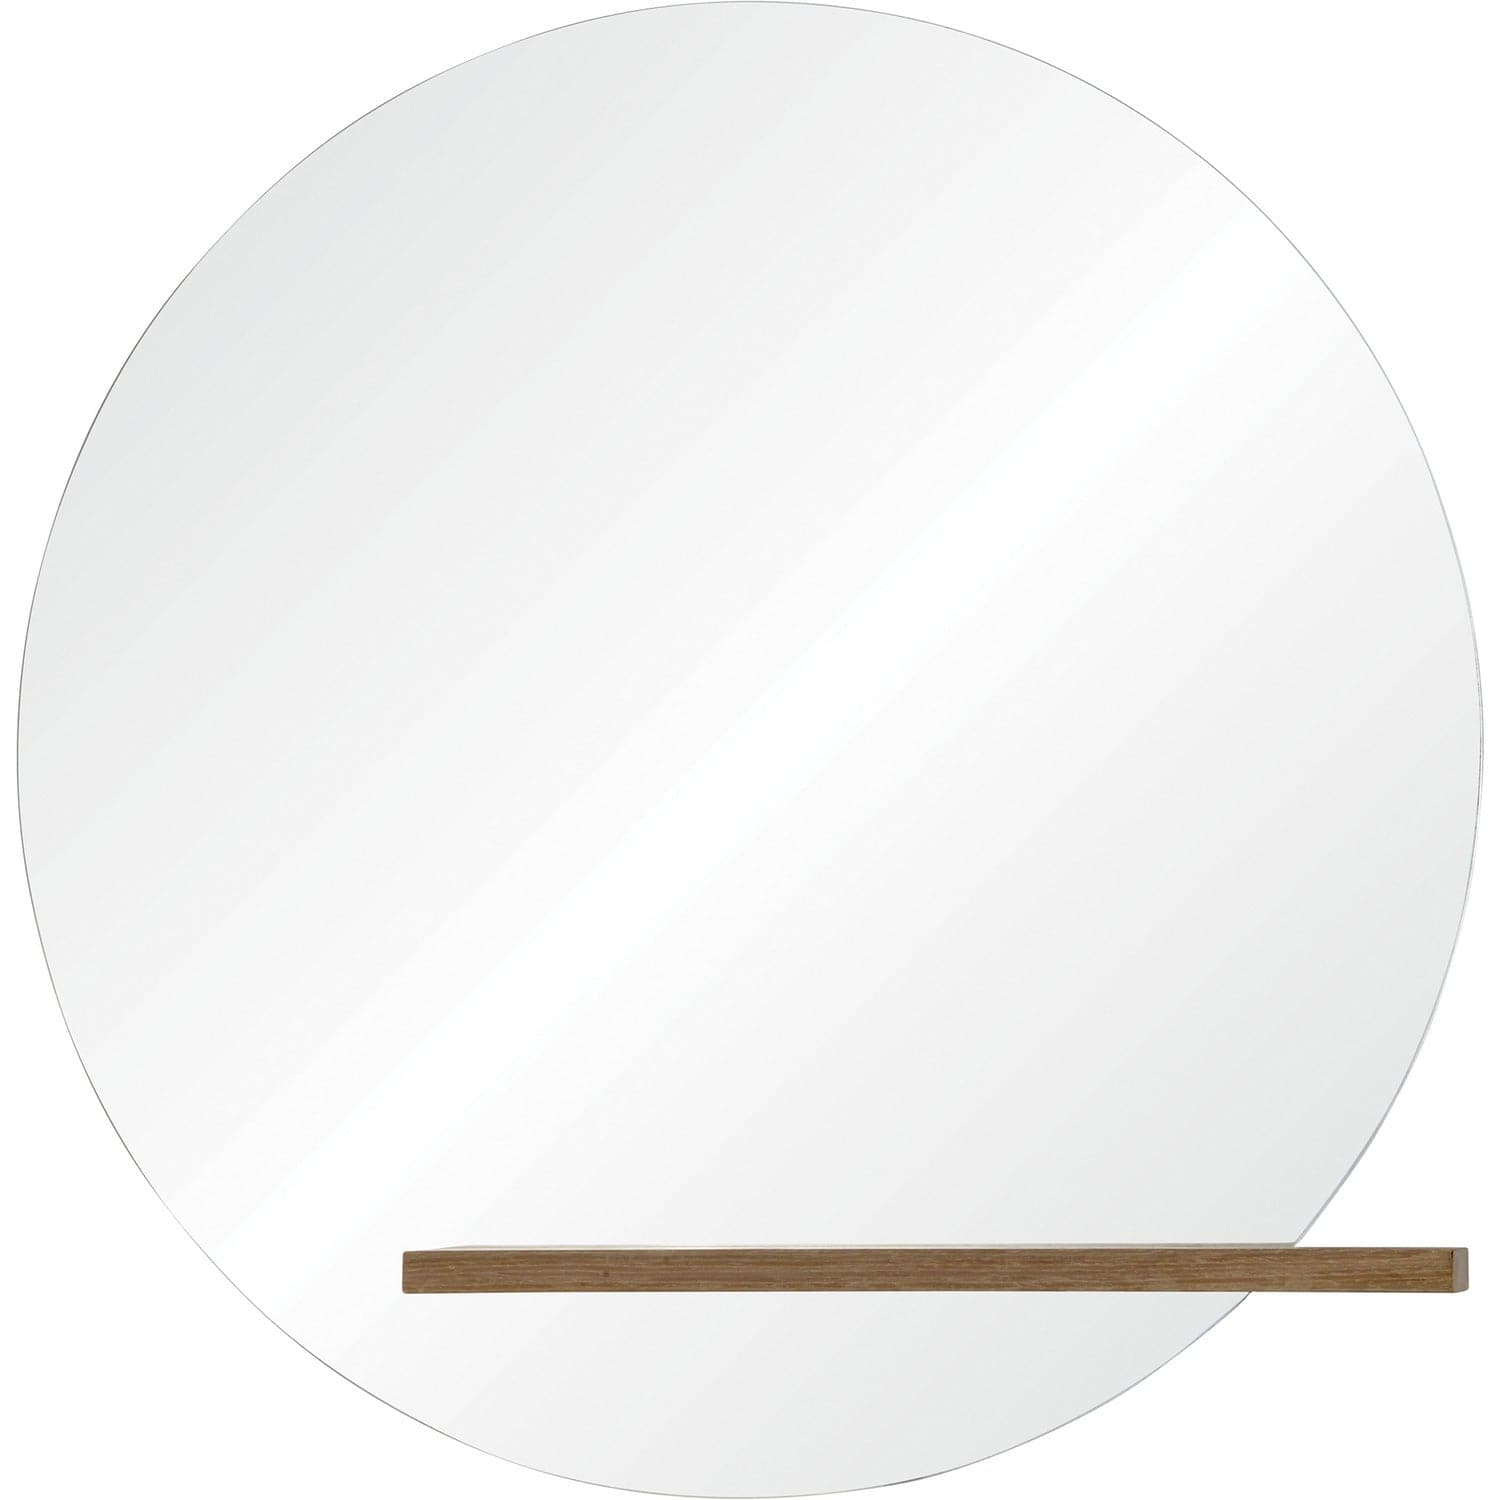 Renwil - MT2270 - Mirrors/Pictures - Mirrors-Oval/Rd.